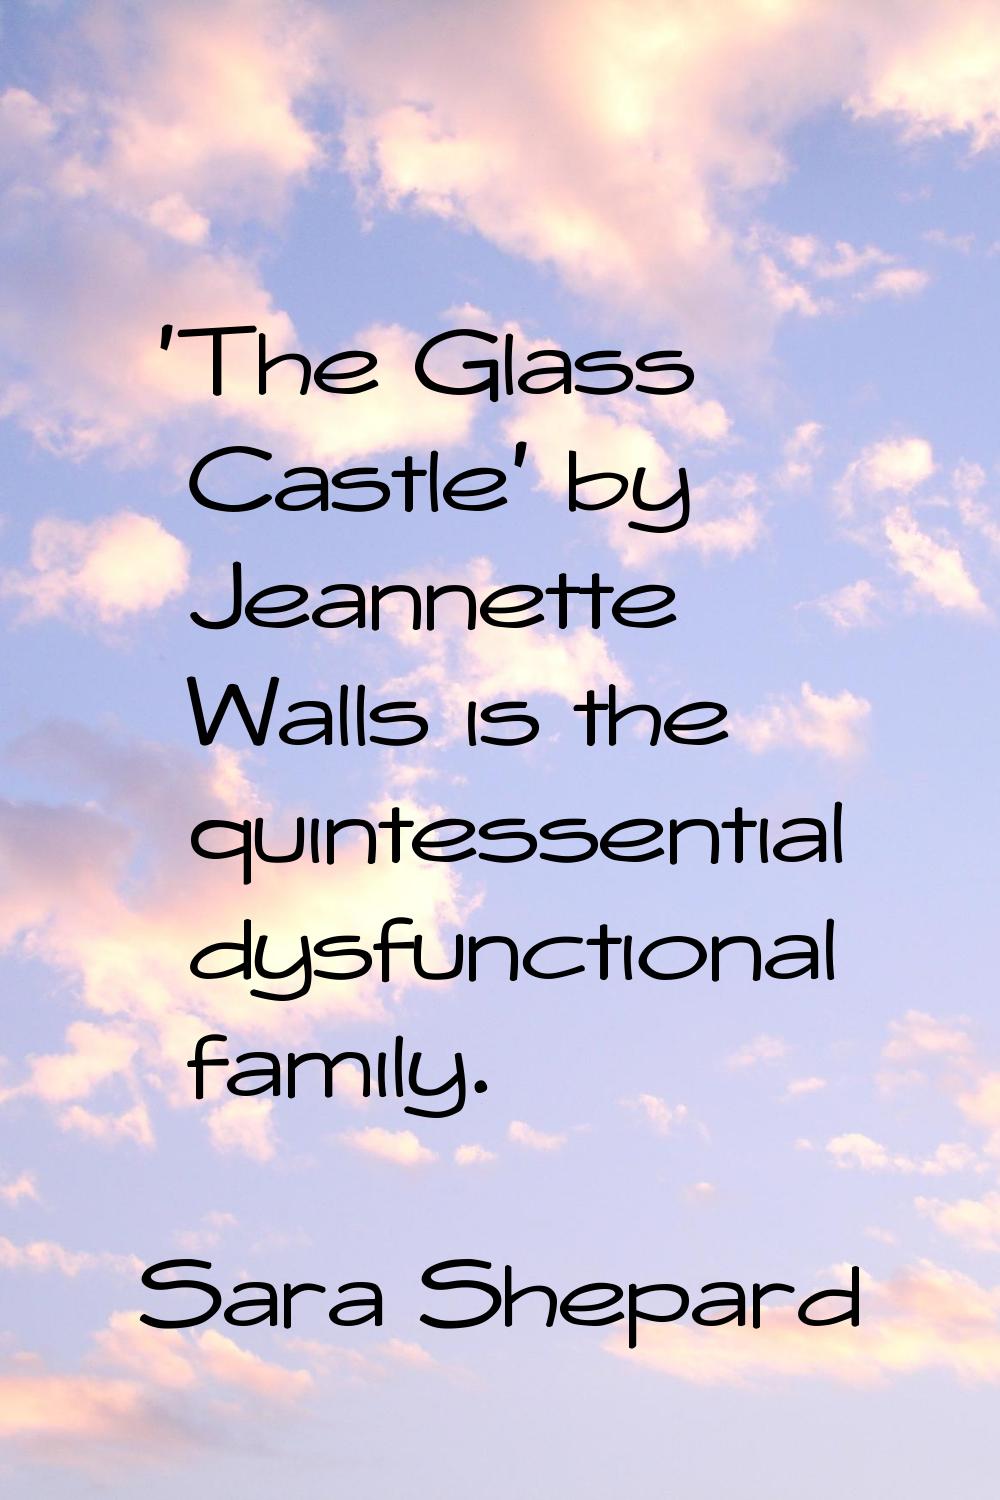 'The Glass Castle' by Jeannette Walls is the quintessential dysfunctional family.